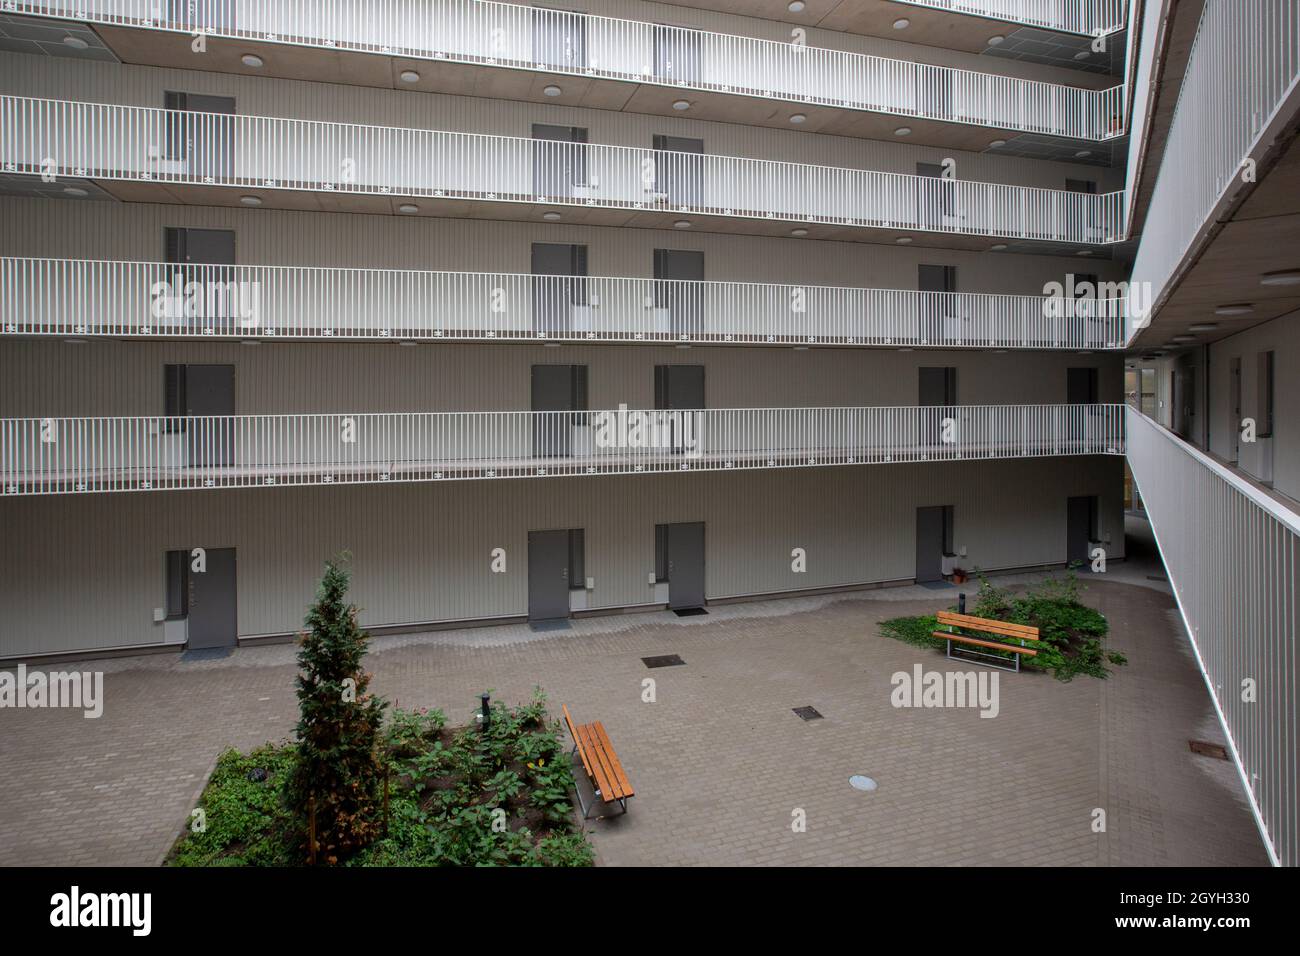 The courtyard of a residential building. Stock Photo